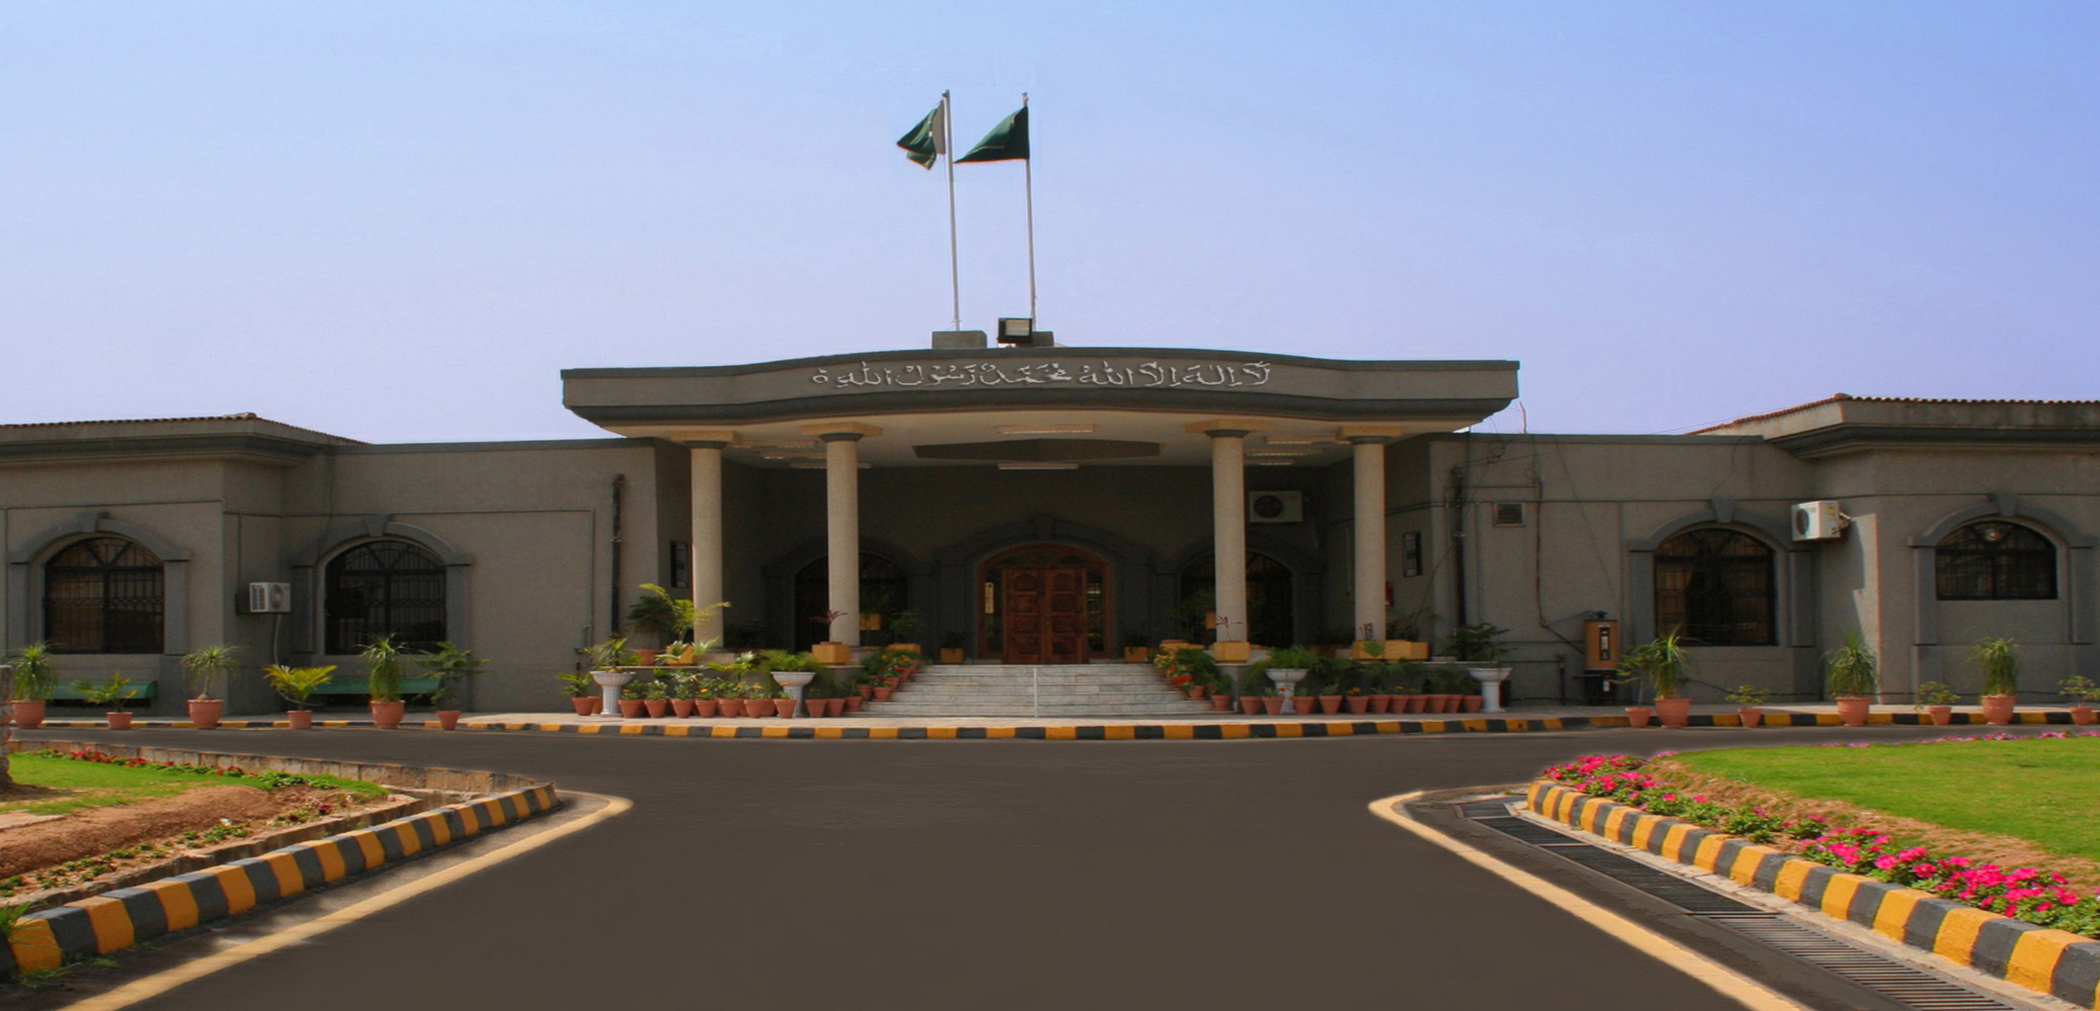 print the entrance to the islamabad high court in pakistan. photo courtesy of ihc - religion news service